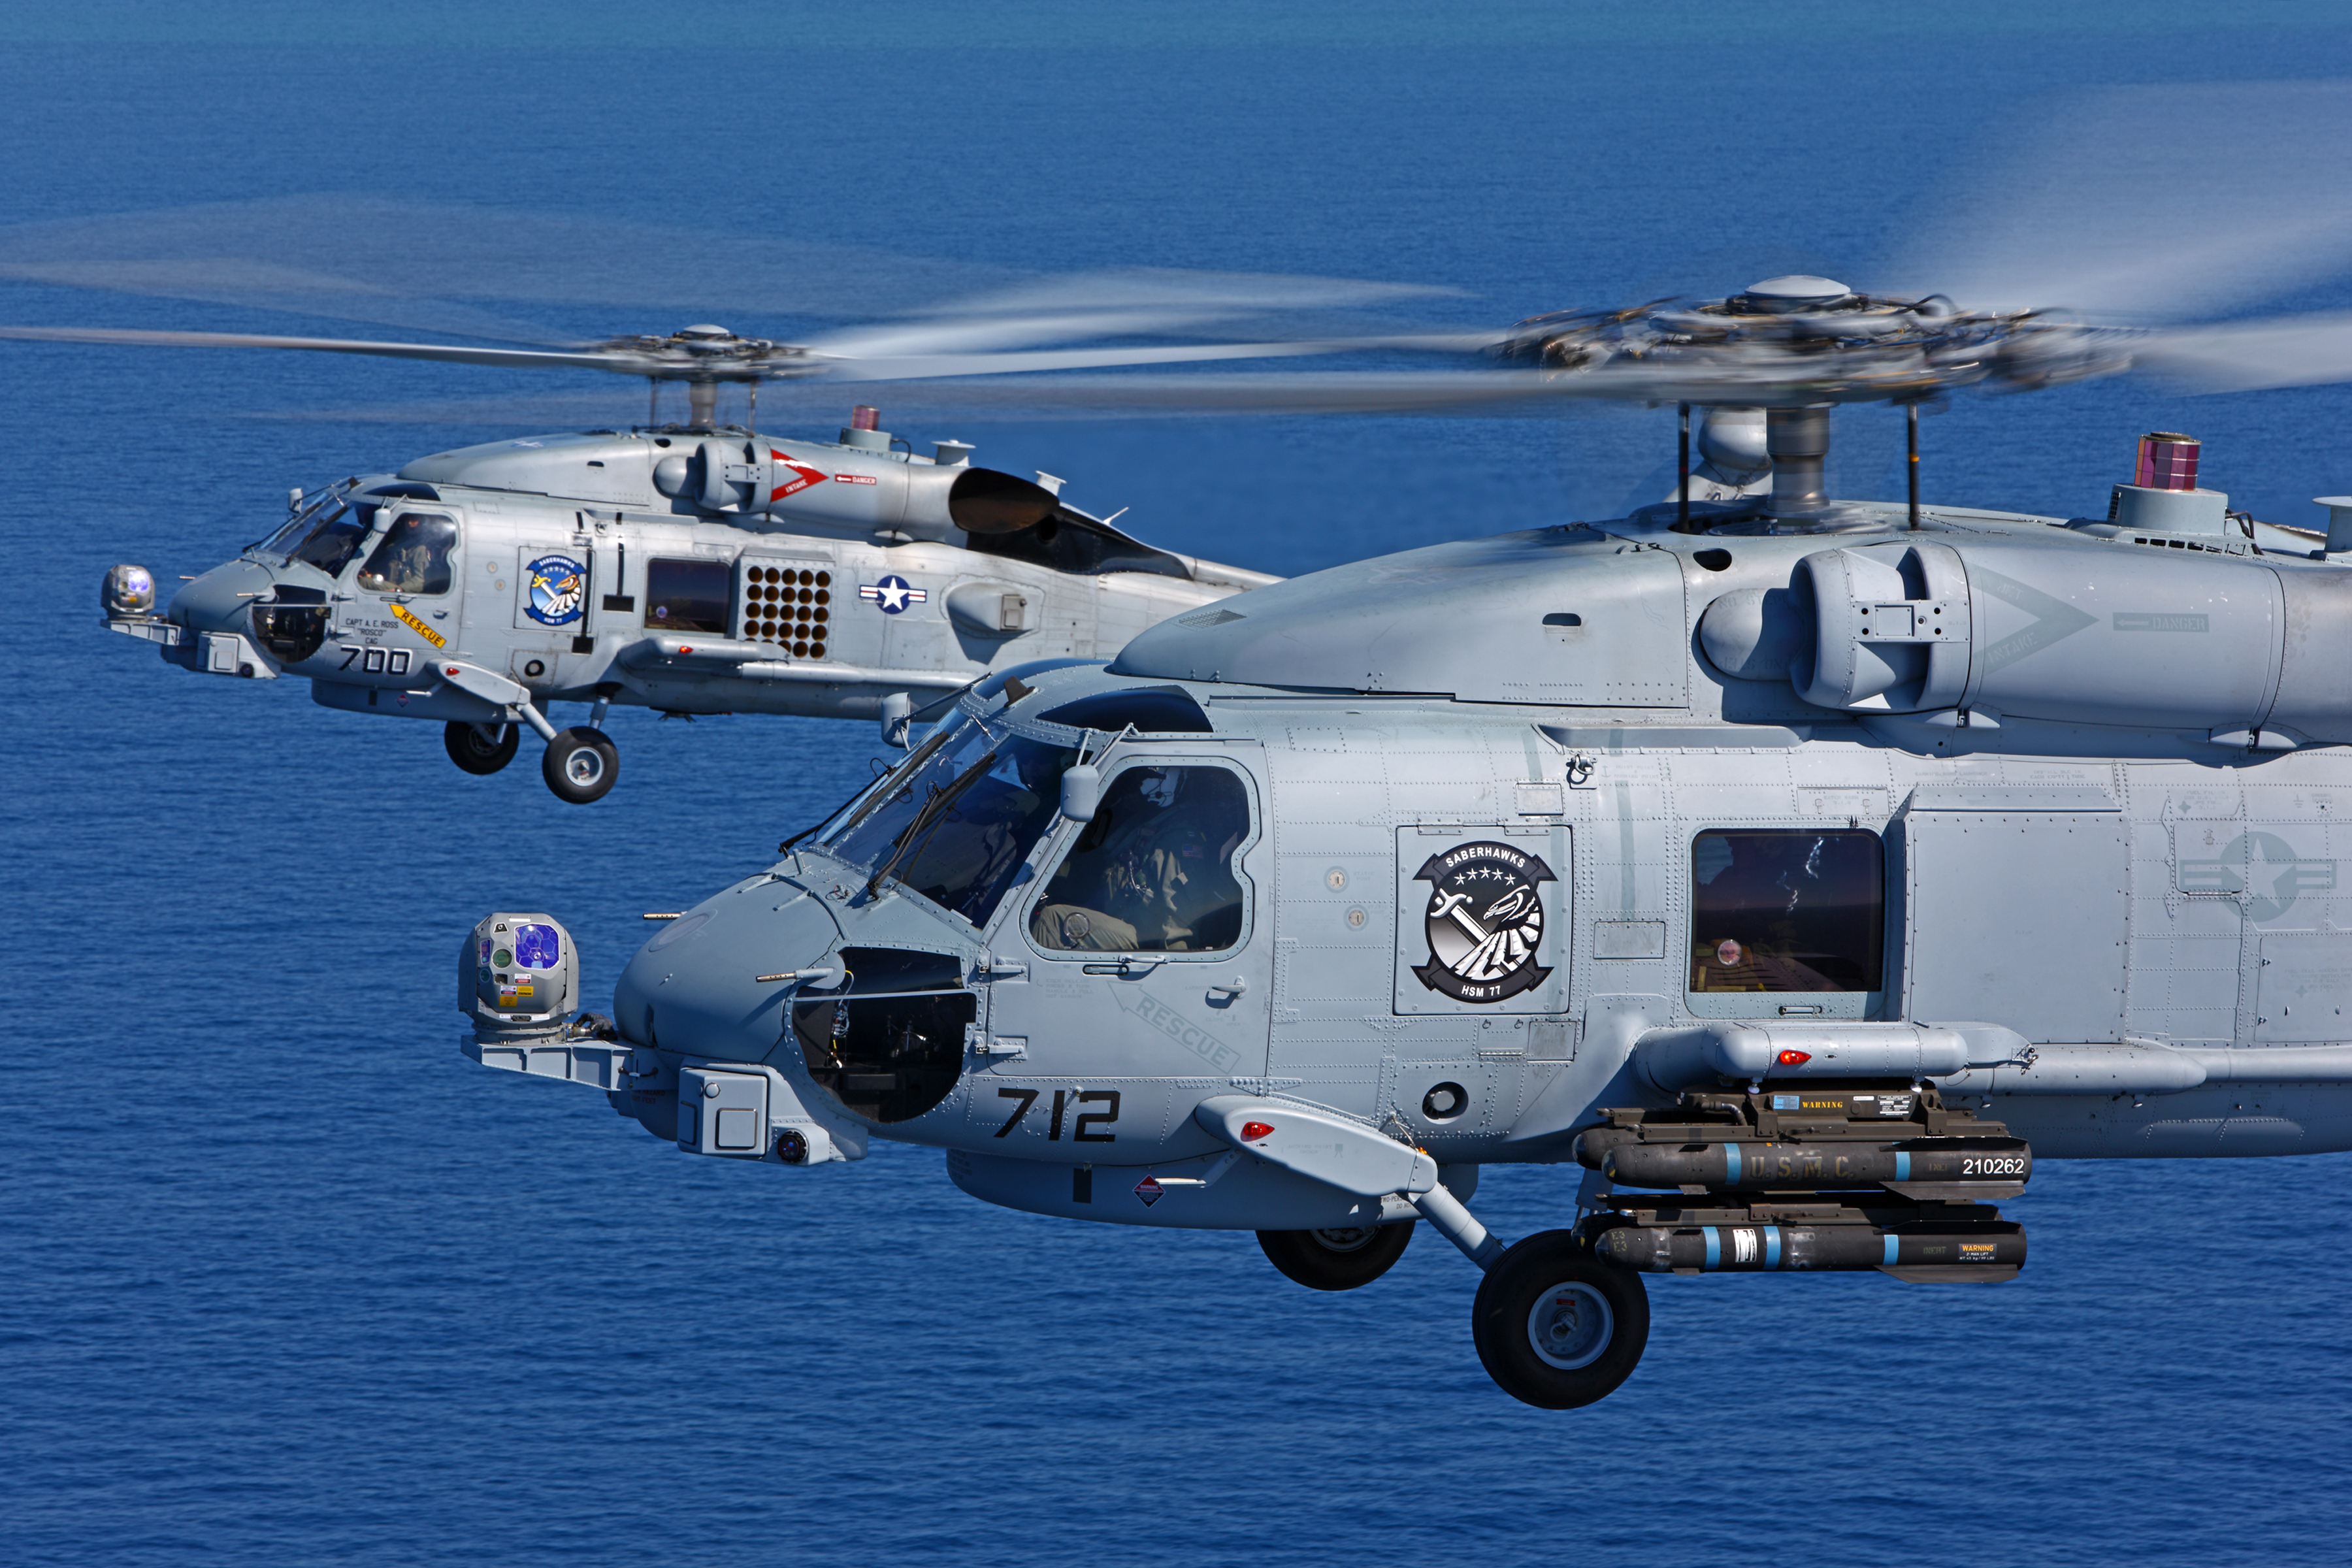 India to buy 24 MH 60 Romeo anti submarine helicopters for navy 5011293075_7550d56ca6_o